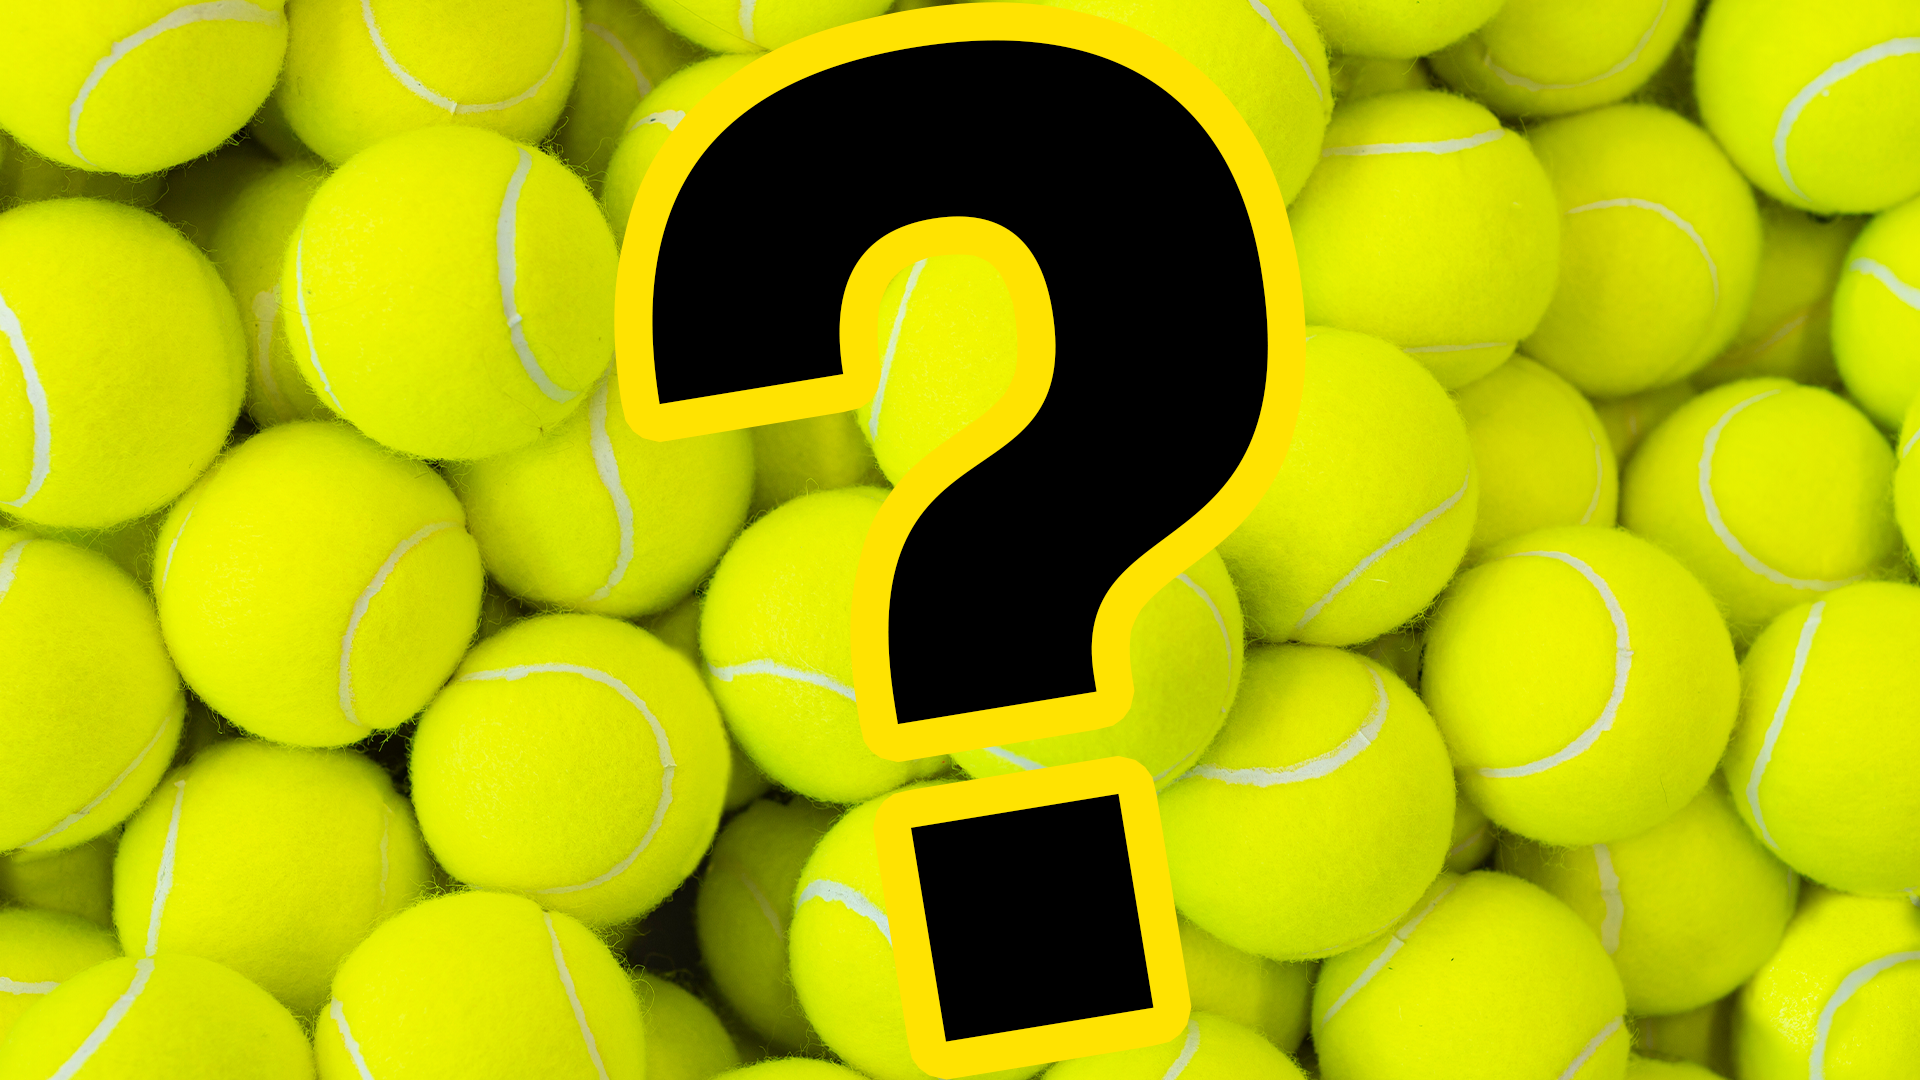 Question mark on tennis ball background